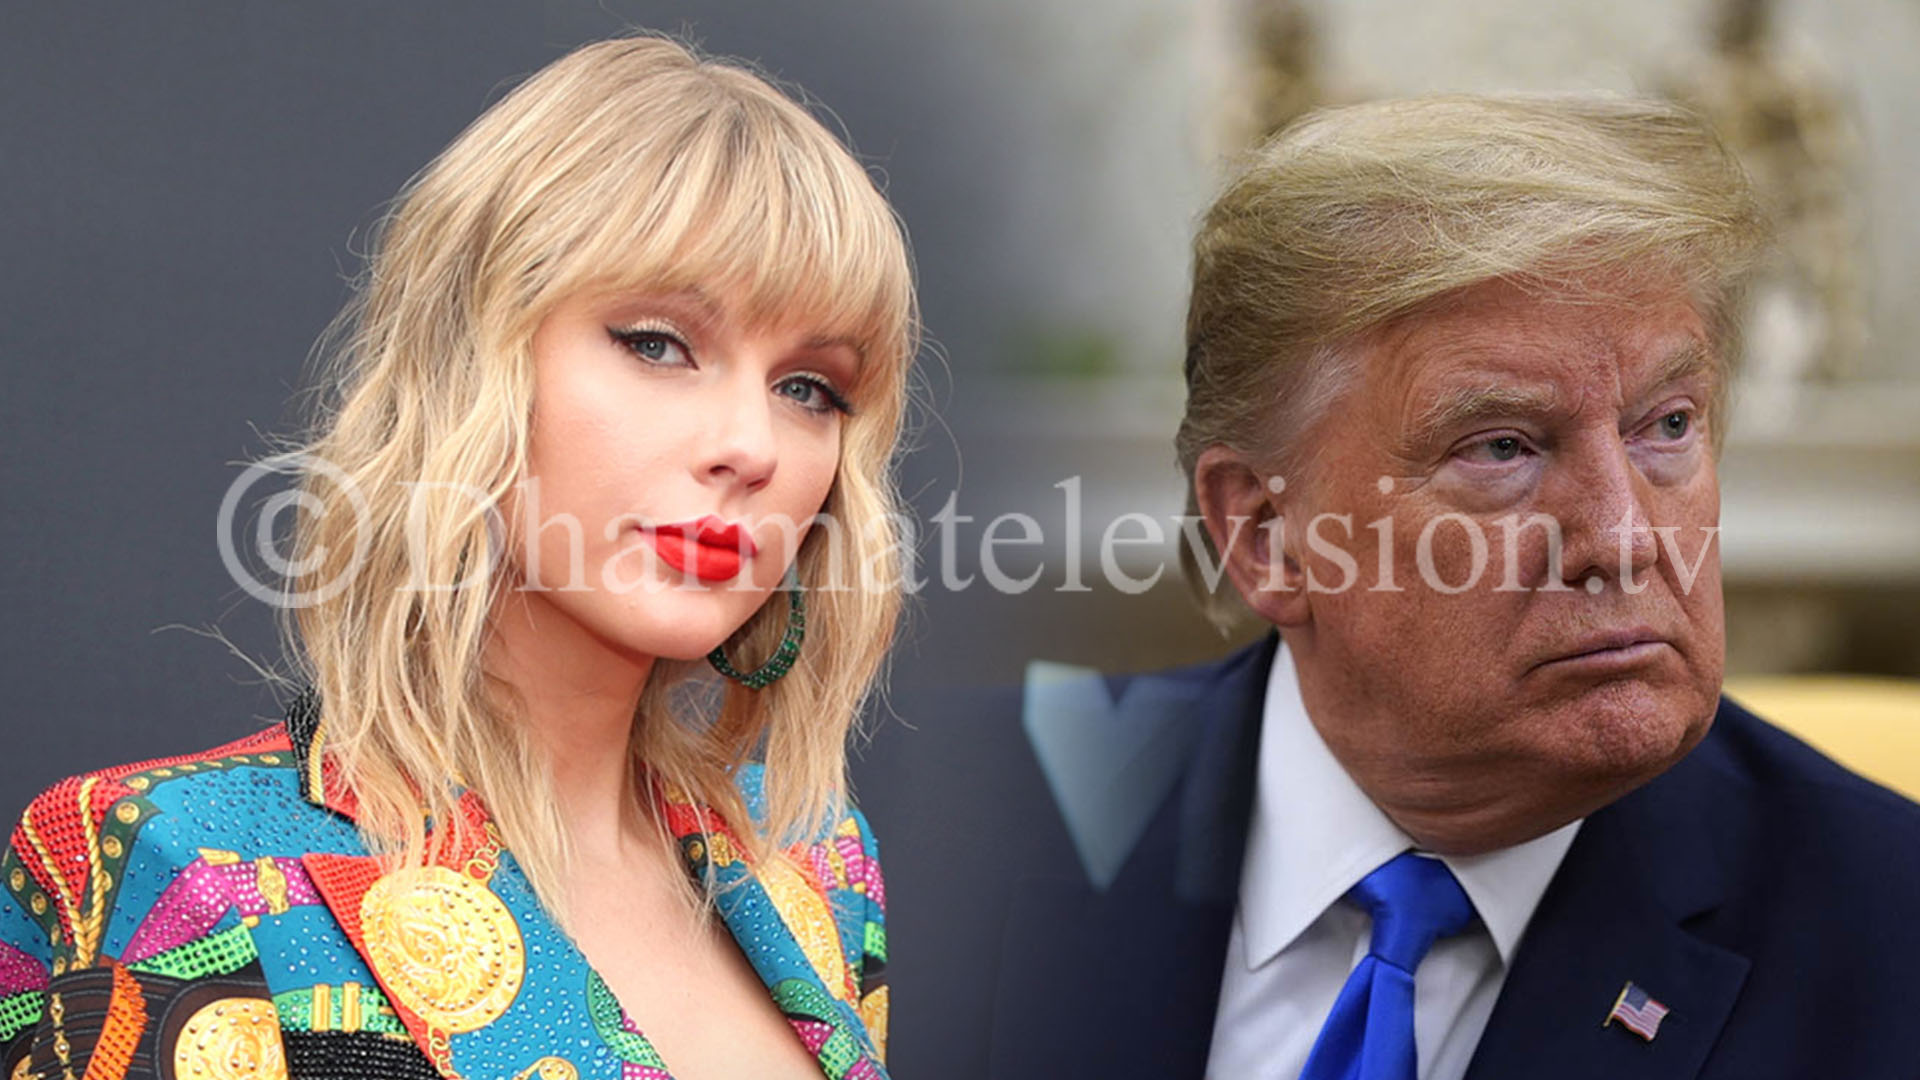 Taylor Swift’s slams Trump's tweet ‘threatening violence’ against protesters